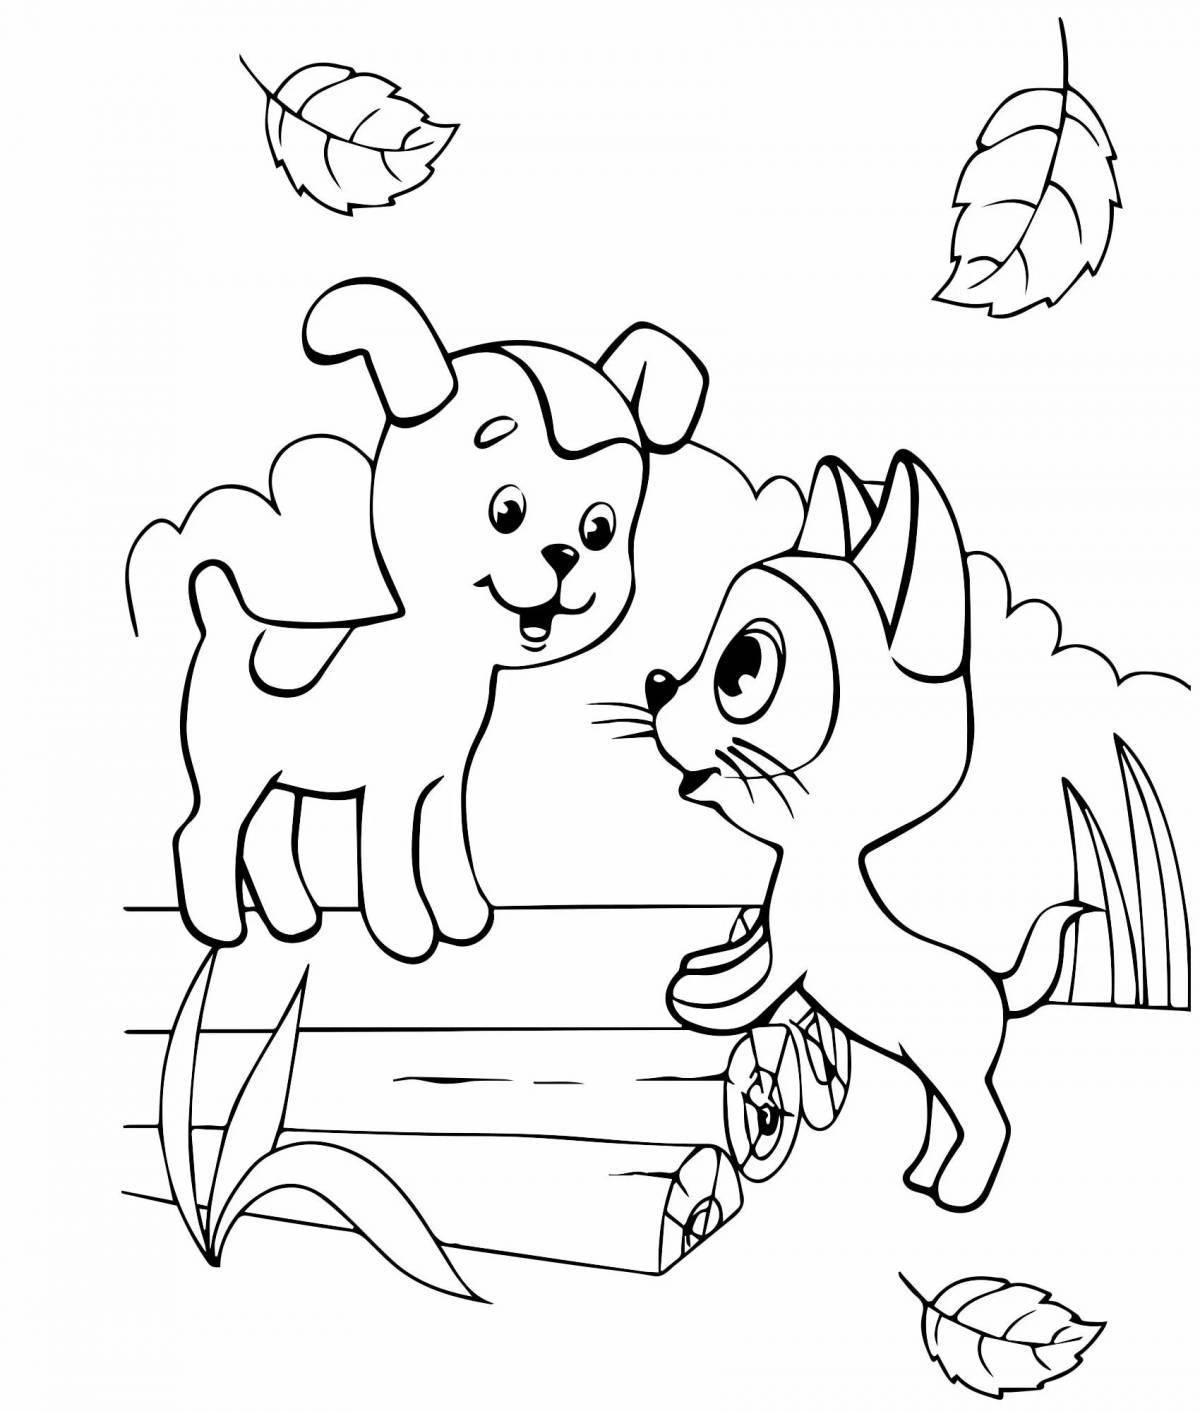 Amazing woof kitty coloring book for kids